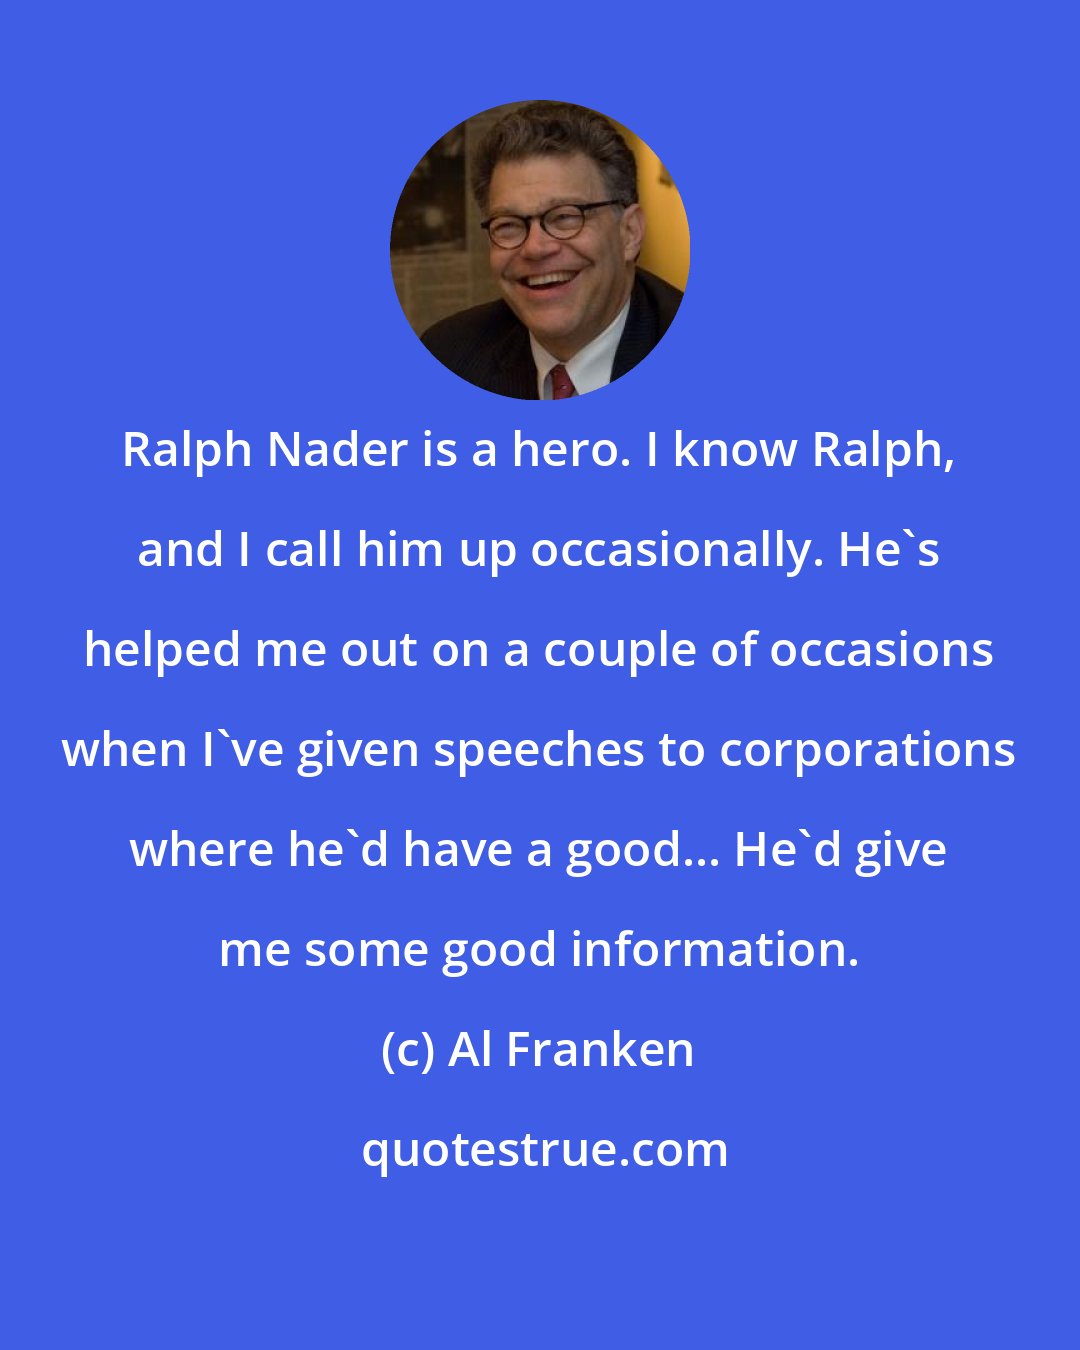 Al Franken: Ralph Nader is a hero. I know Ralph, and I call him up occasionally. He's helped me out on a couple of occasions when I've given speeches to corporations where he'd have a good... He'd give me some good information.